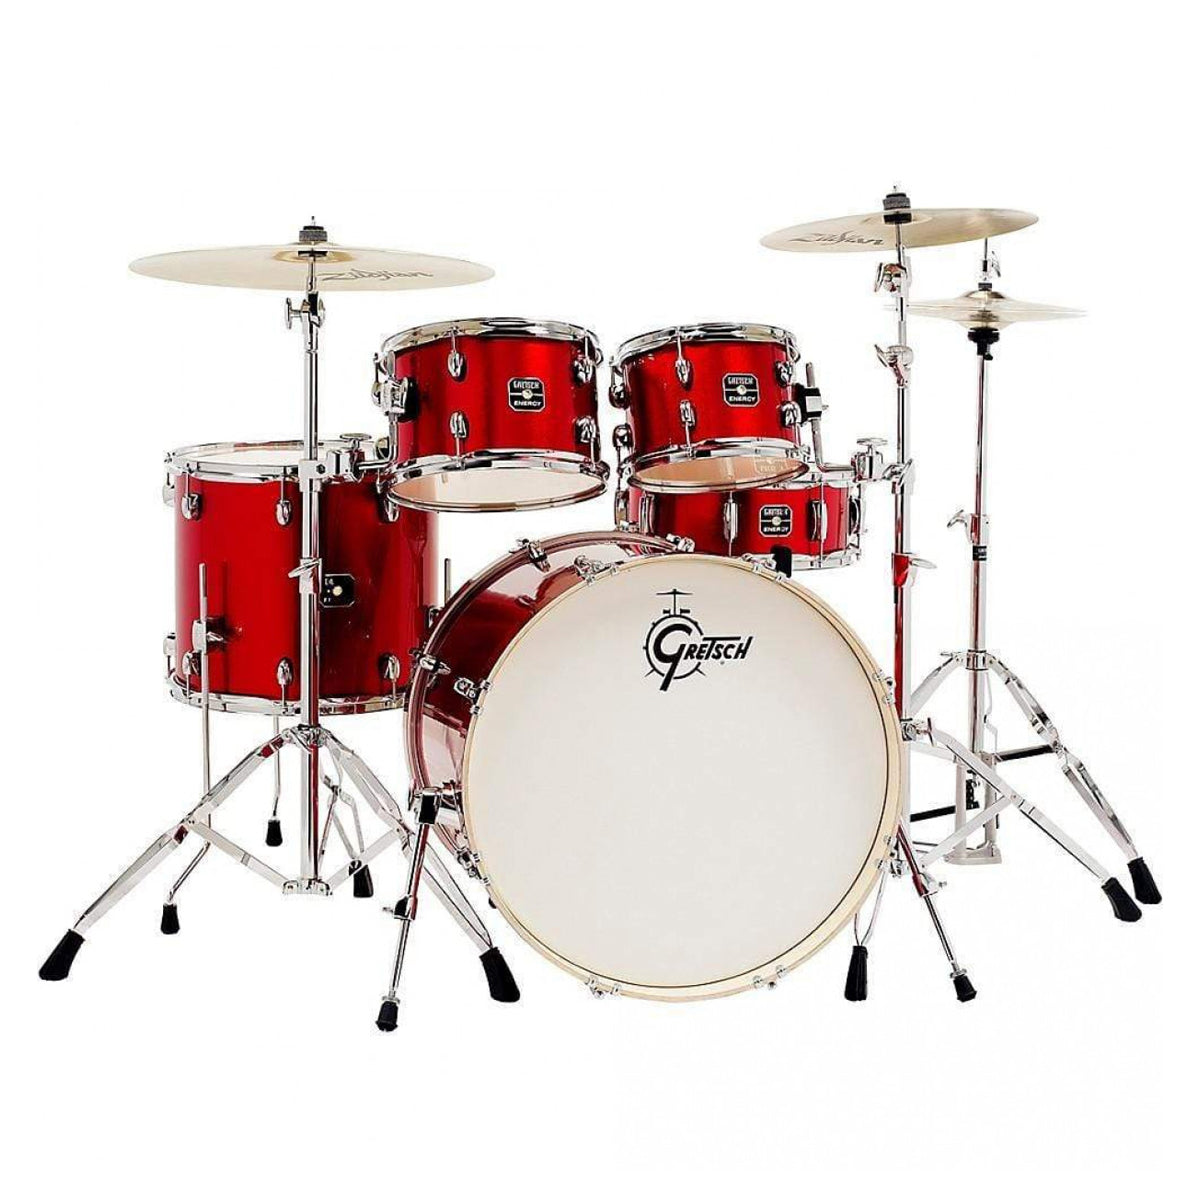 Gretsch Drums GE4E825R Energy Kit W/22" Kick And Hardware - Red